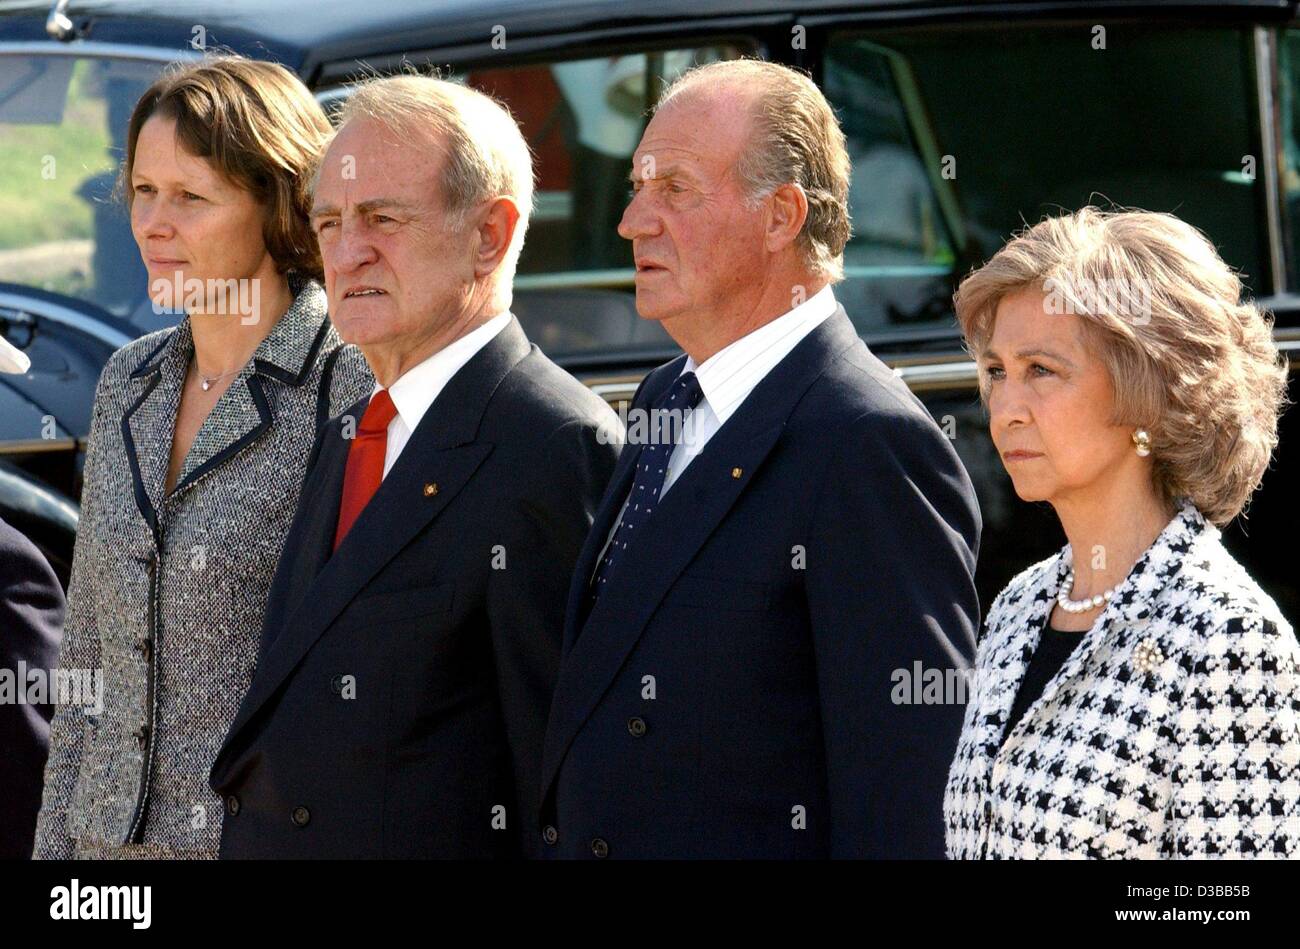 (dpa) - From L: Christina Rau, wife of the German President, President Johannes Rau, King Juan Carlos of Spain and Queen Sofia pose next to the royal limousine in the court of the Pardo Palace in Spain's capital Madrid, 11 November 2002. Rau was on a three-day state visit to Spain and the holiday is Stock Photo